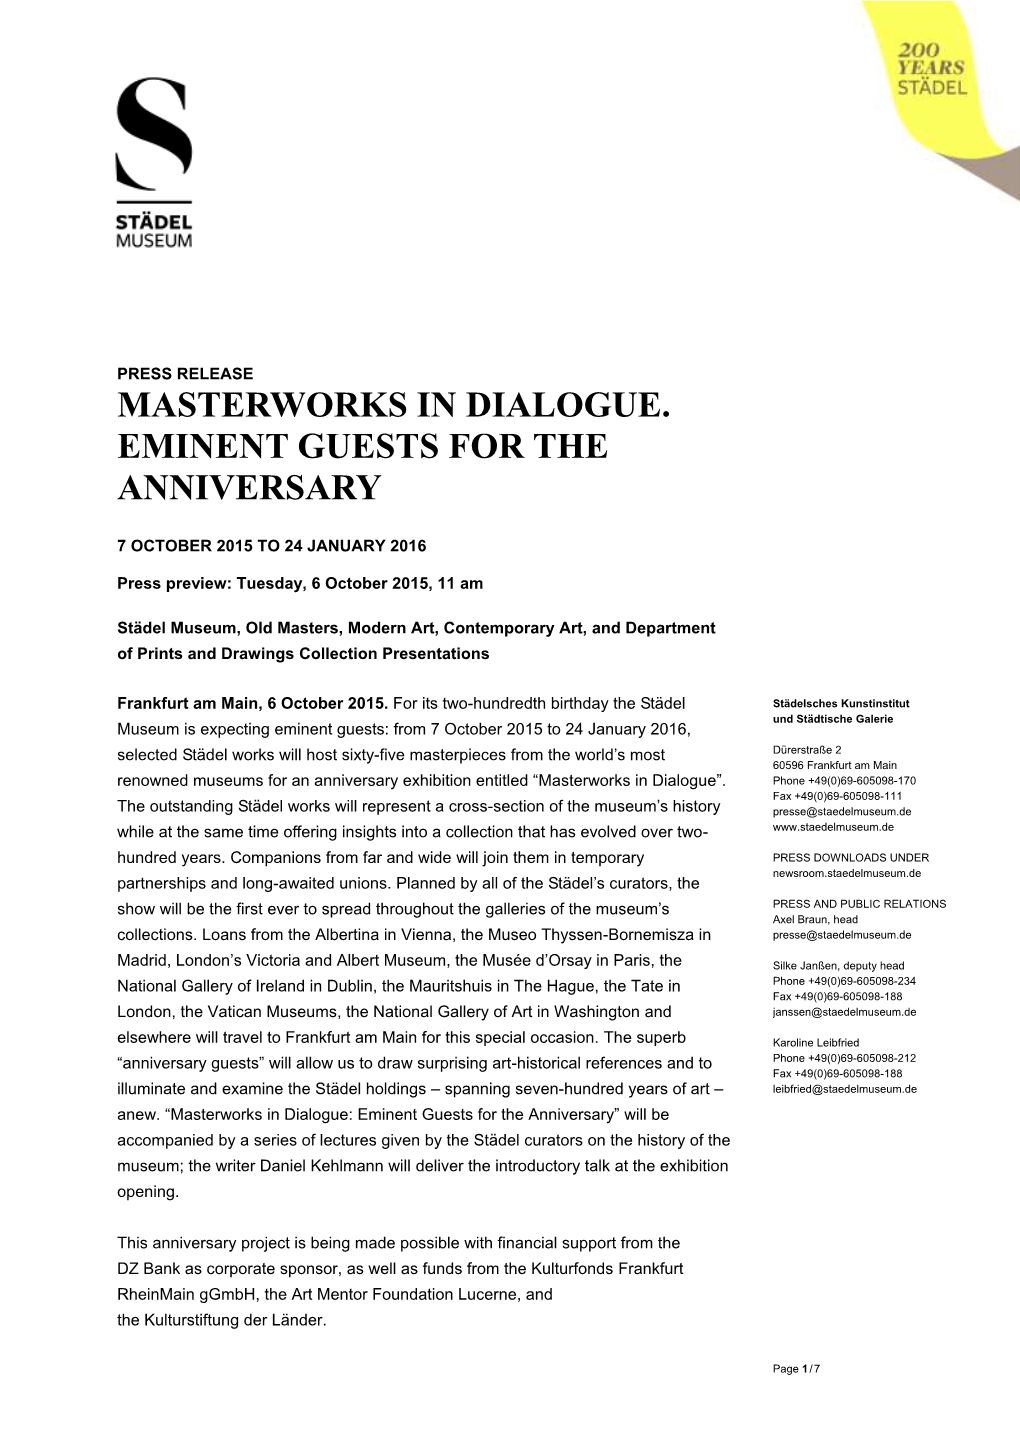 Masterworks in Dialogue. Eminent Guests for the Anniversary